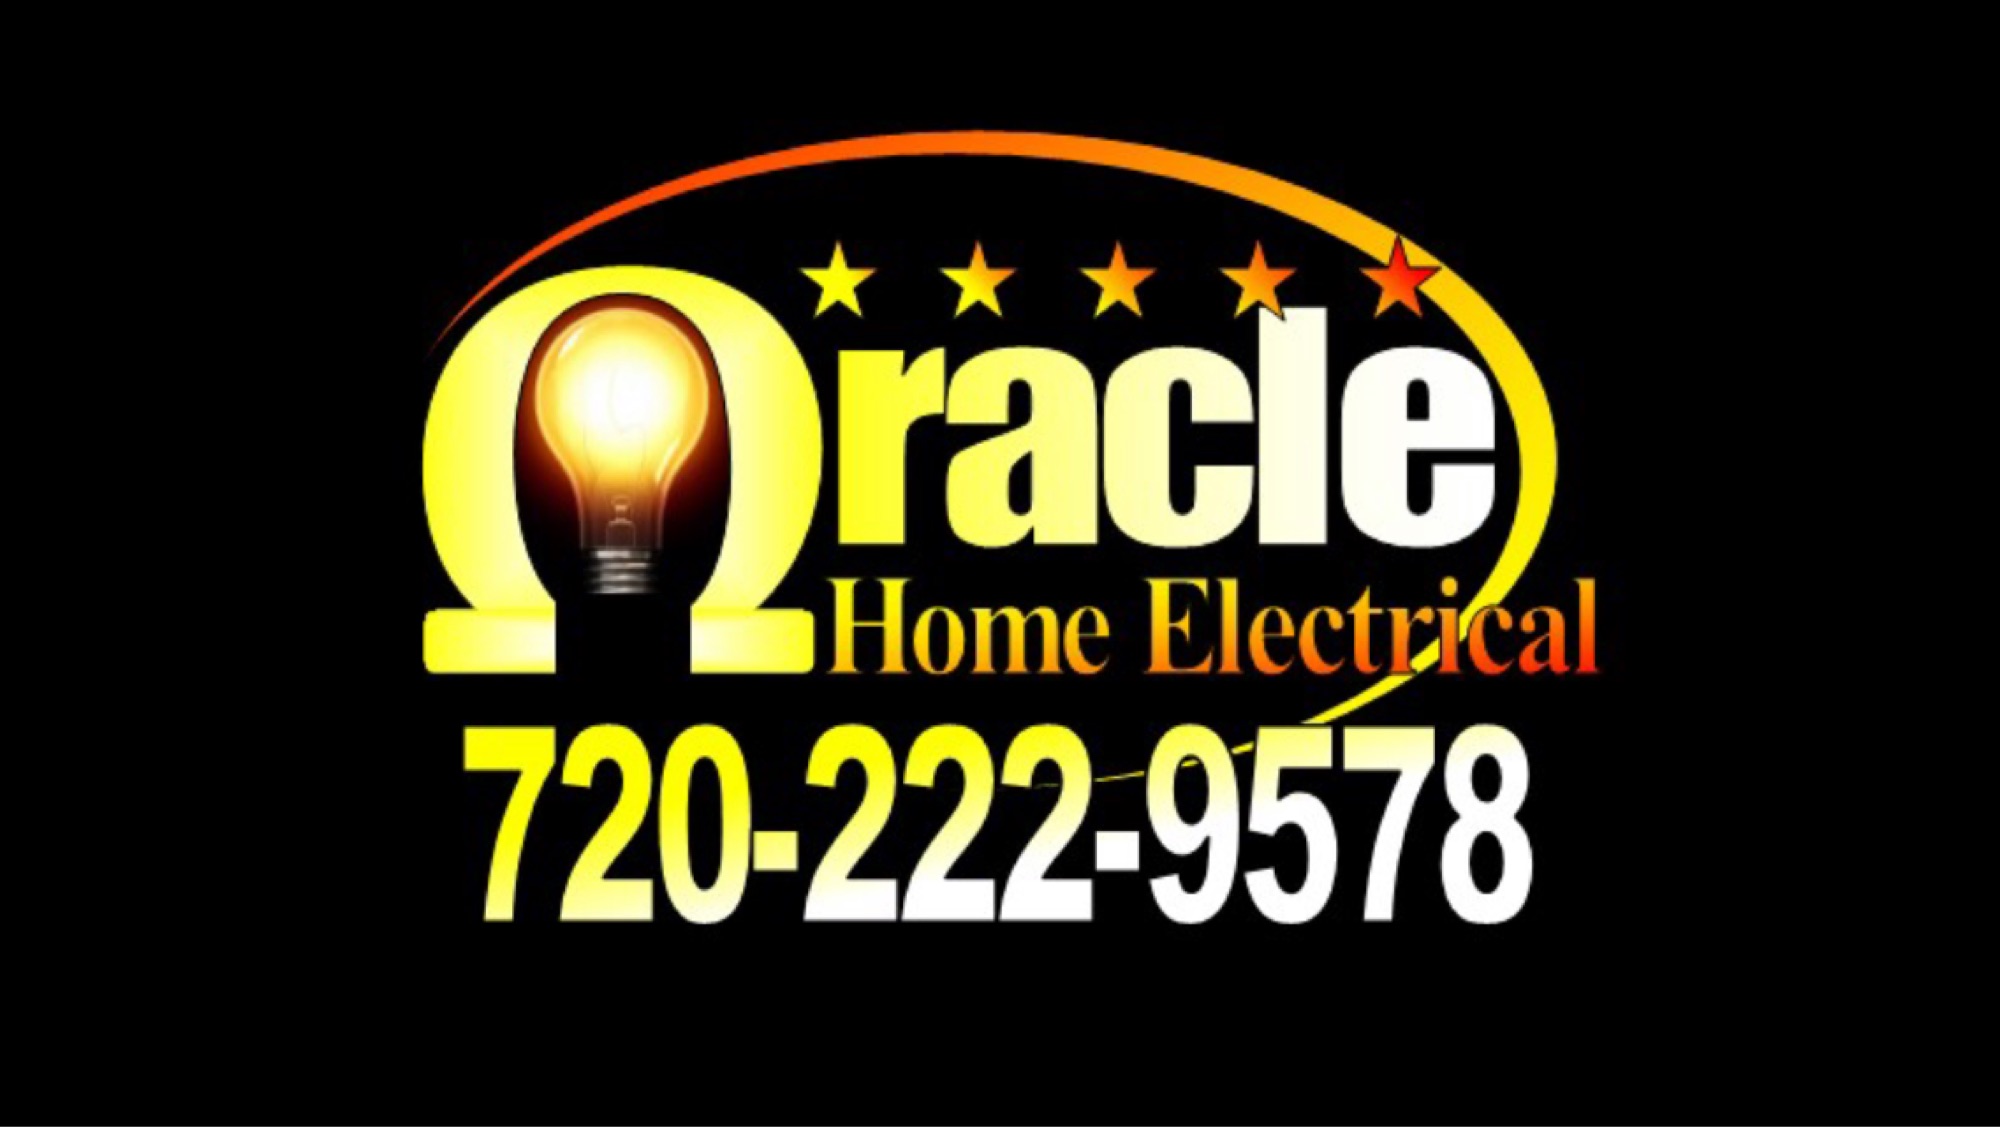 Oracle Home Electrical Services Logo